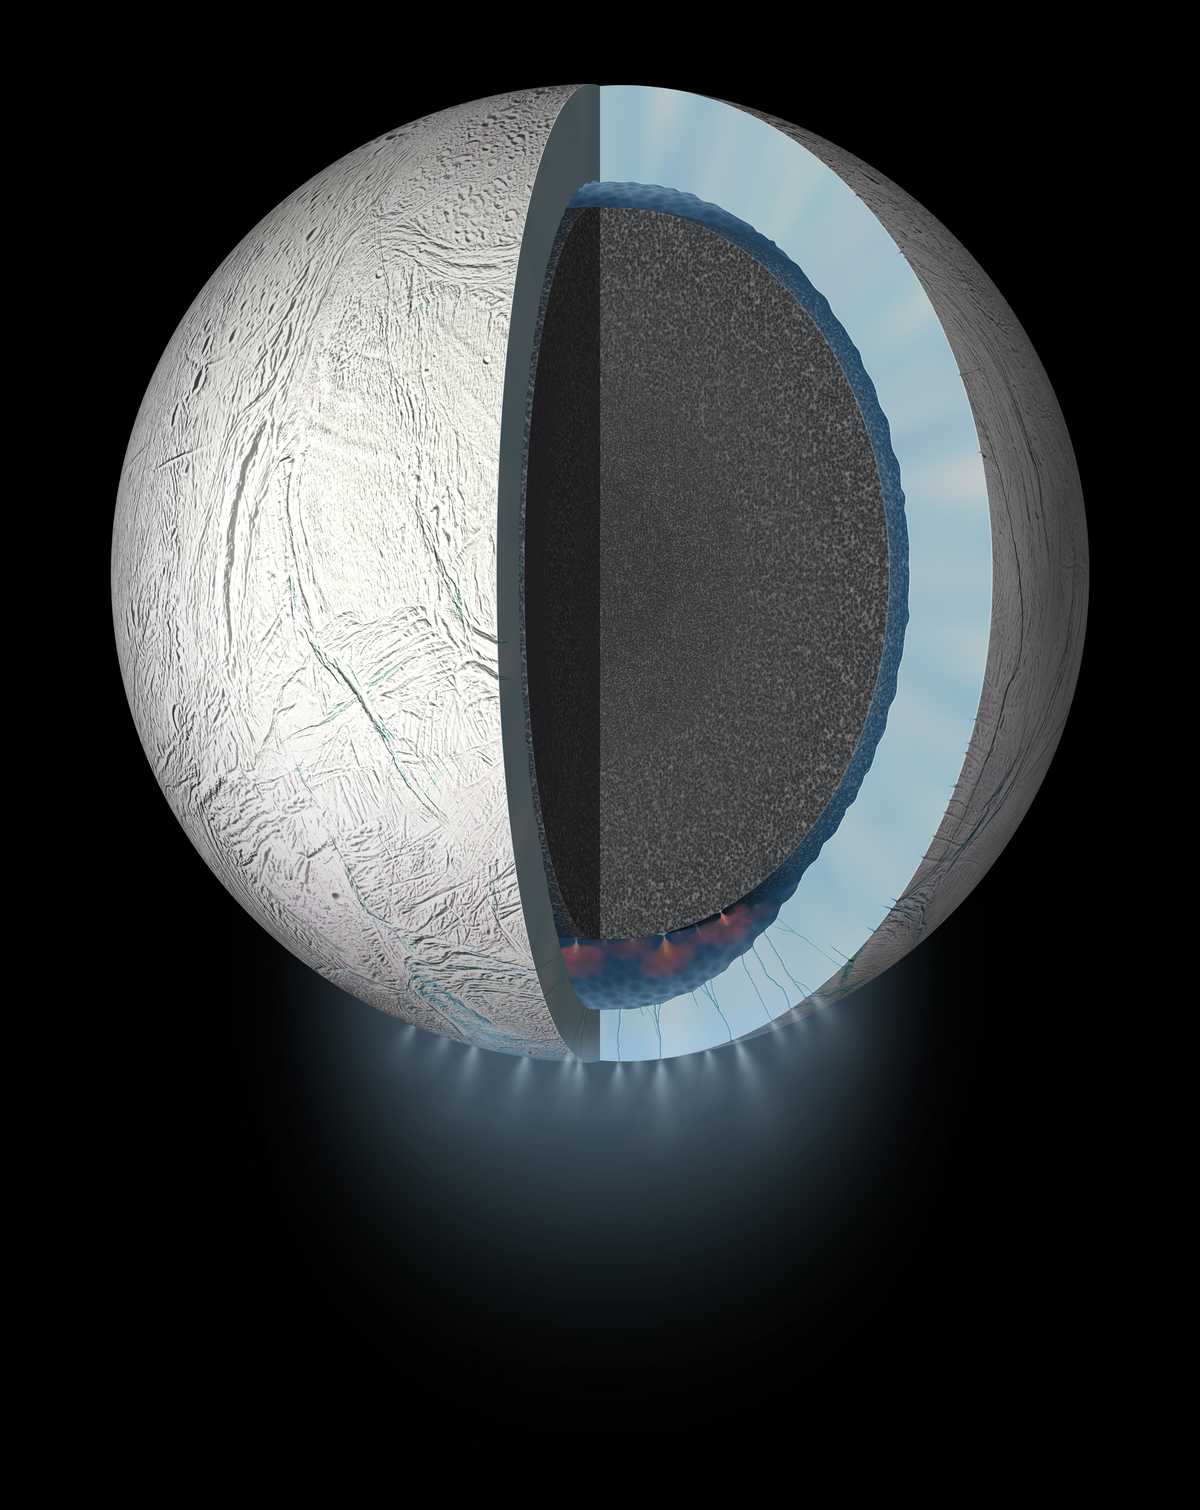 Artistic representation of Enceladus's core with plumes coming from the bottom of the planet